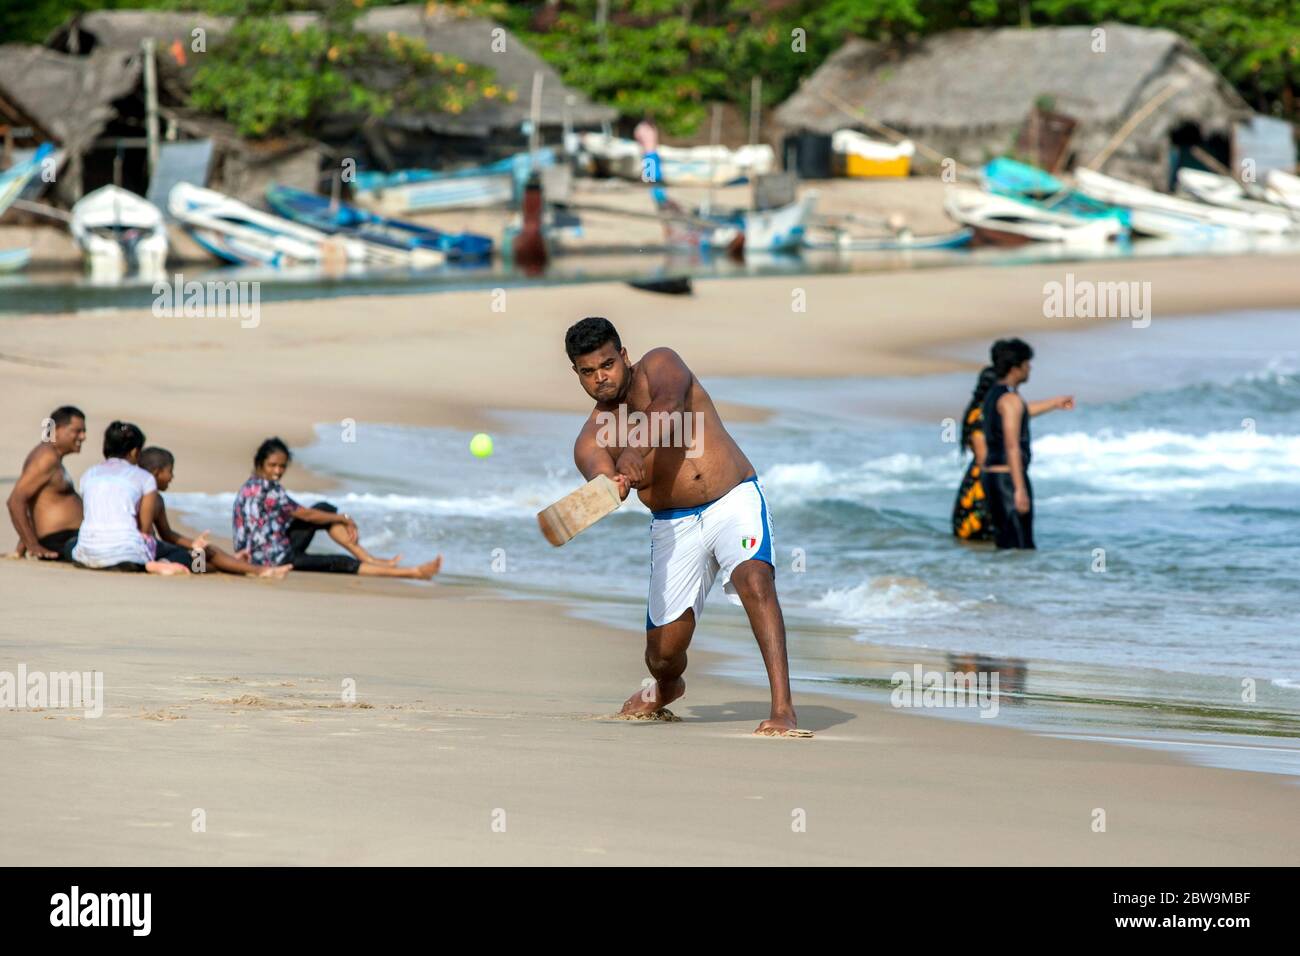 A man enjoys hitting a ball whilst playing cricket on the sand beach in Arugam Bay on the east coast of Sri Lanka. Stock Photo